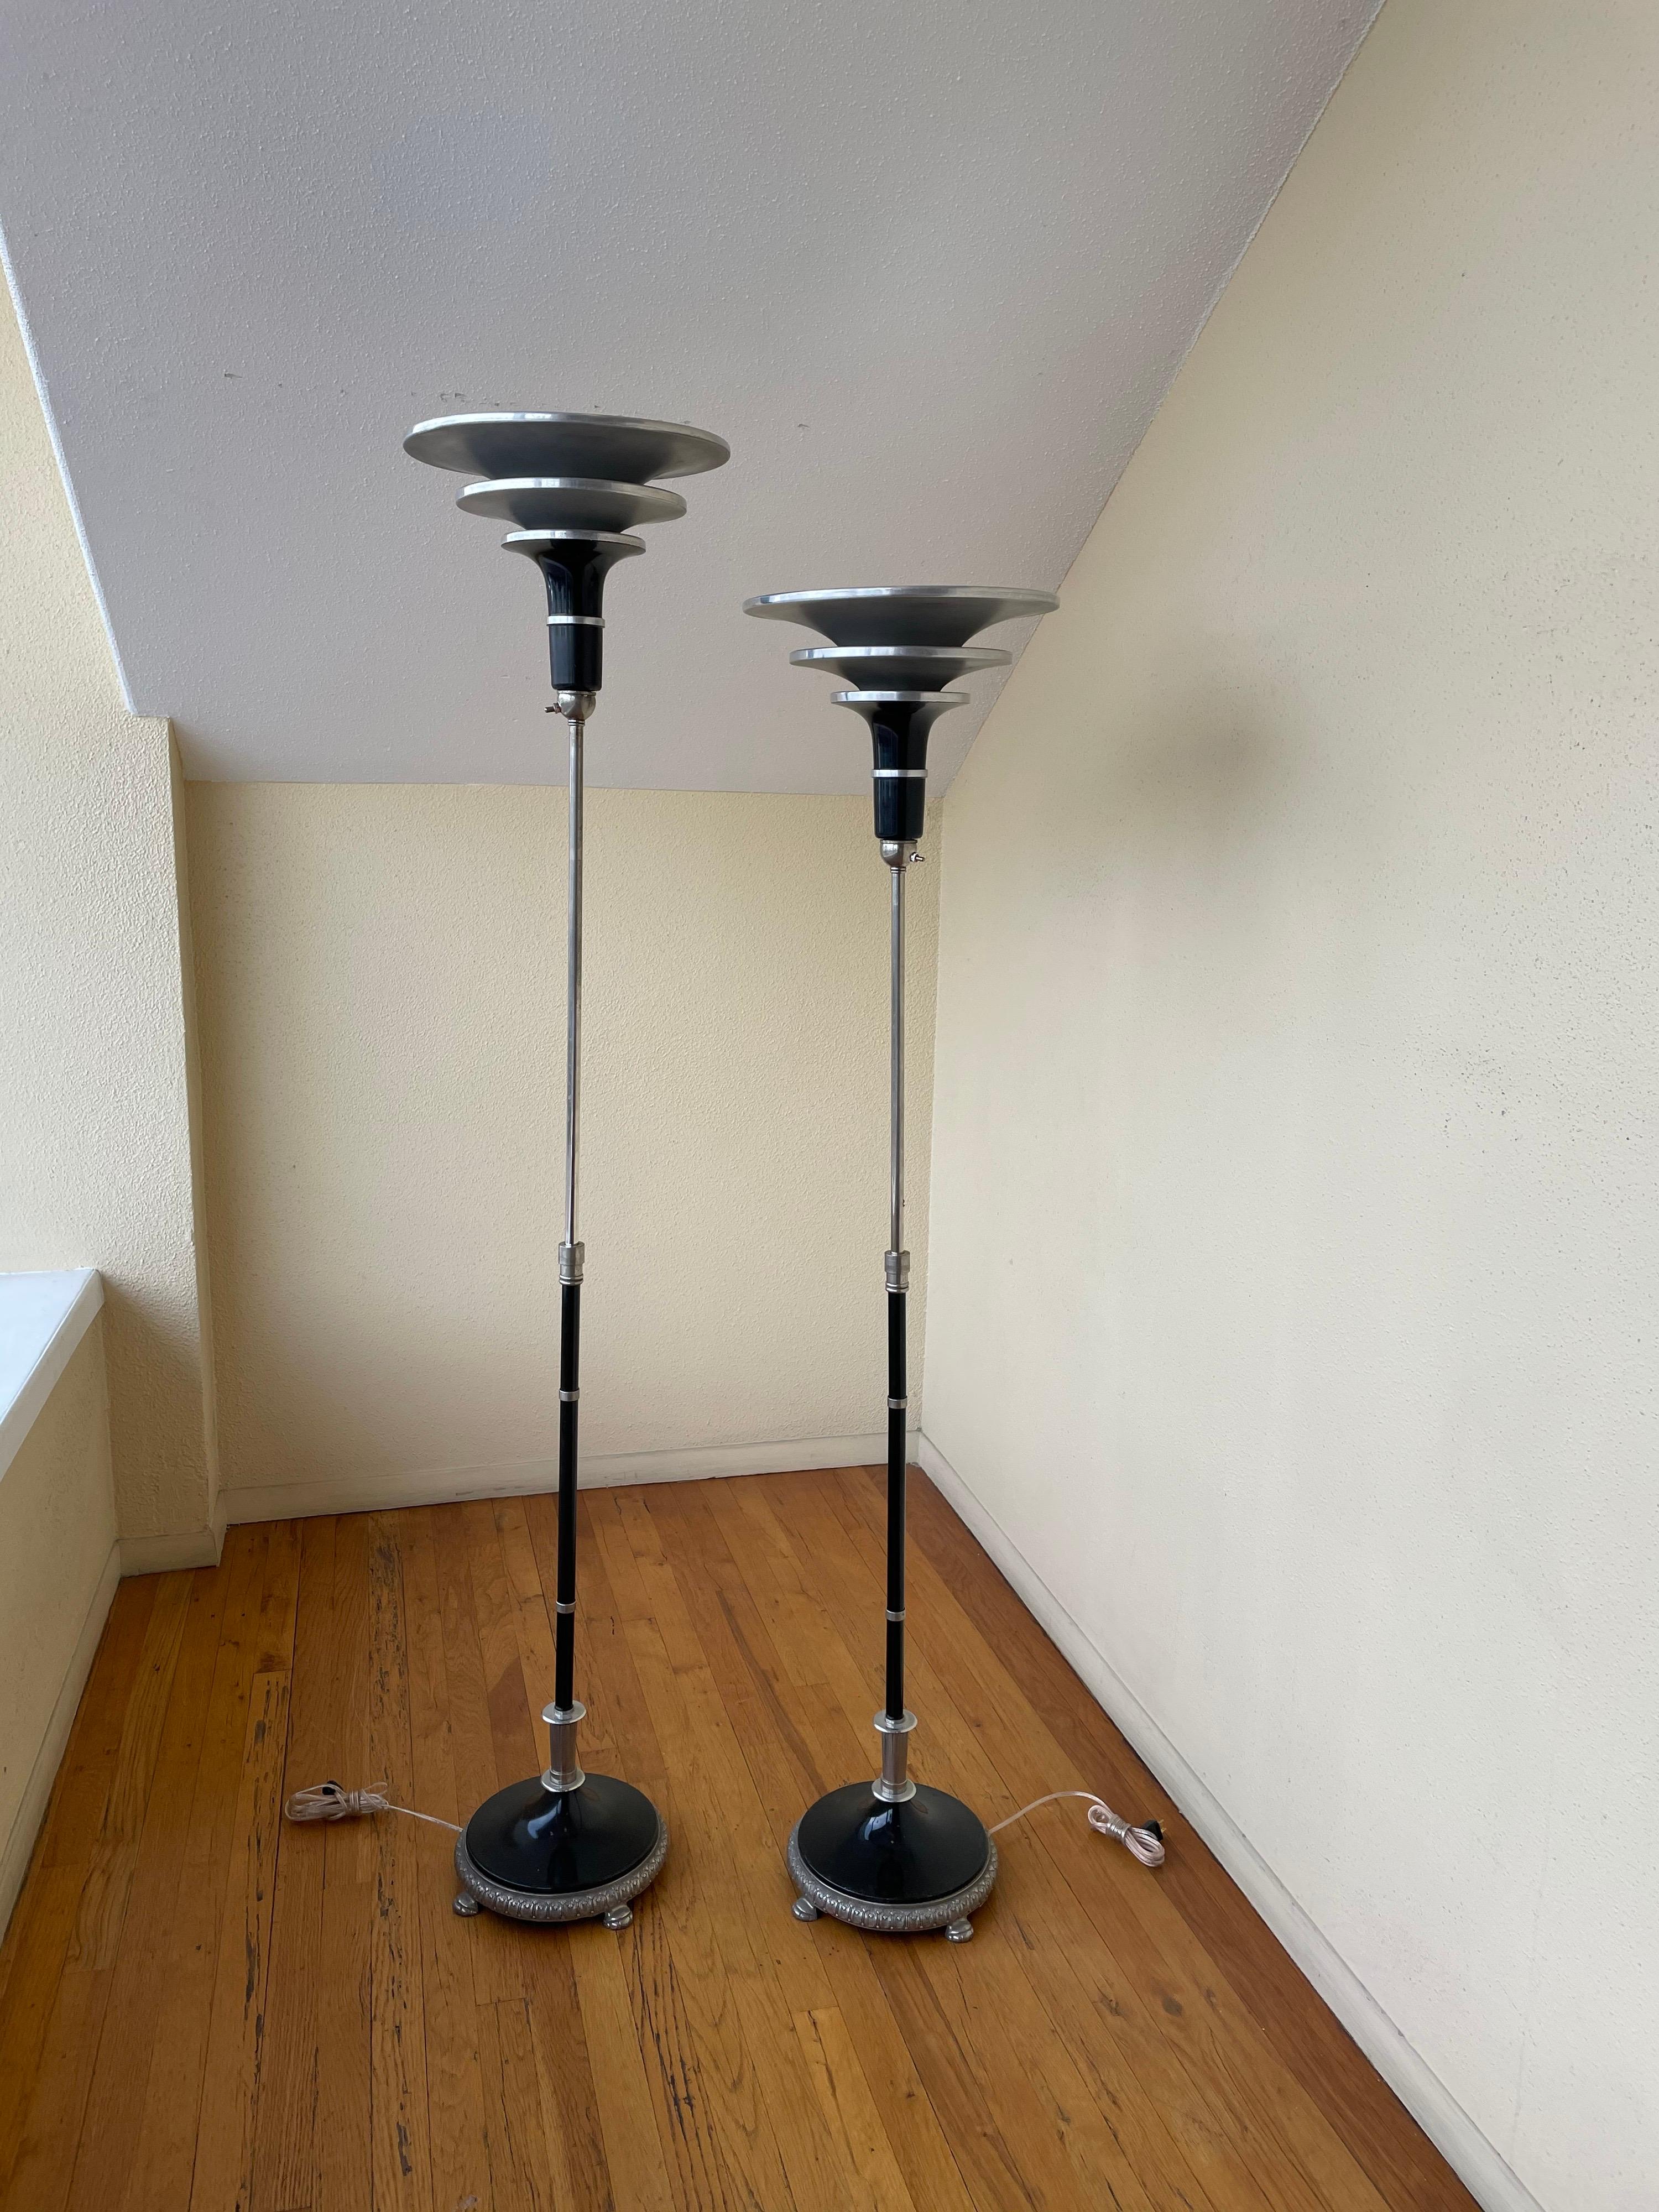 Nice pair of torchiere Art deco lamps freshly rewired, nice aluminum shades the lamps move up and down, a very rare and hard to find pair in its original condition. The lamps move from 57